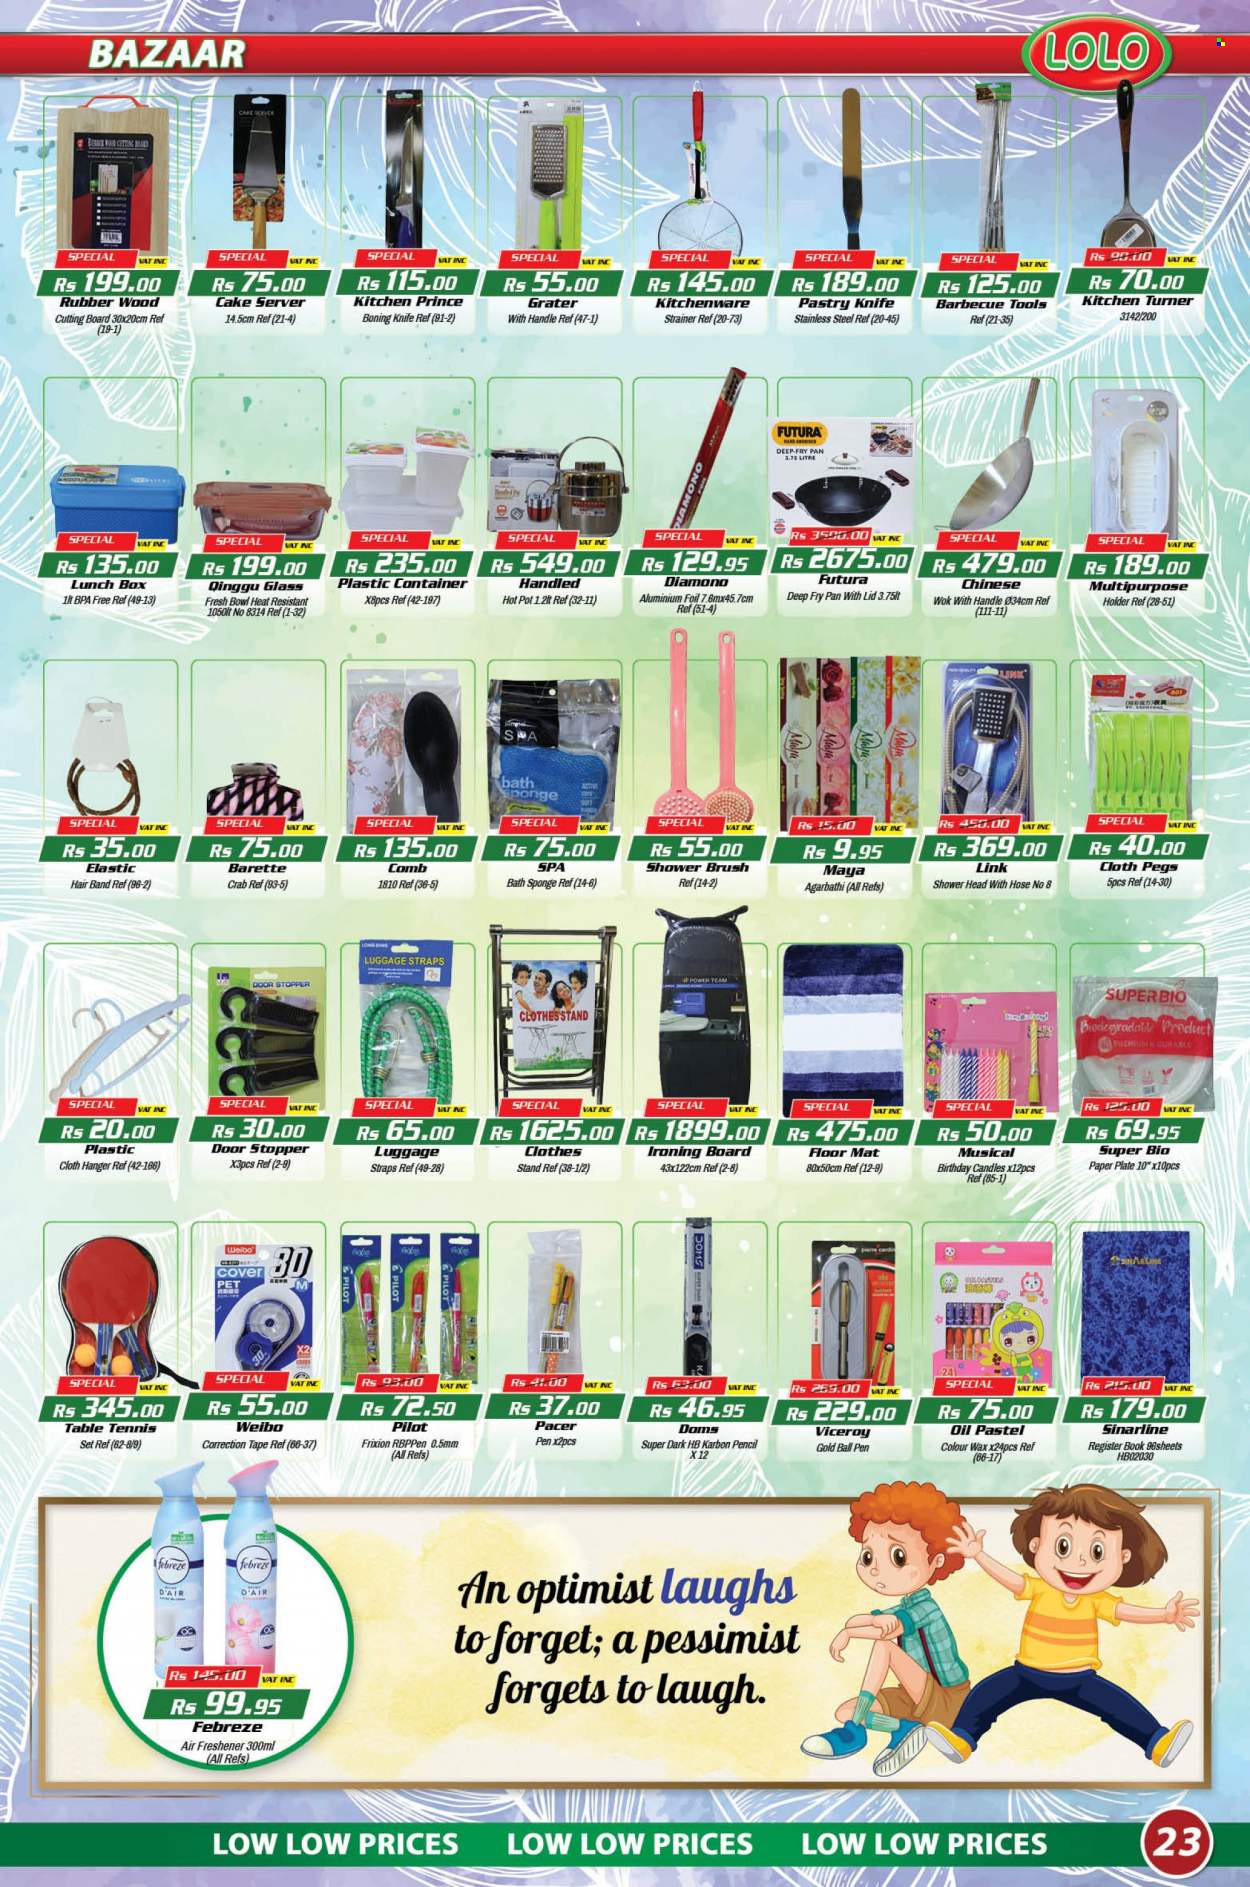 thumbnail - LOLO Hyper Catalogue - 26.09.2022 - 17.10.2022 - Sales products - cake, crab, Febreze, comb, knife, holder, hanger, ironing board, brush, bath sponge, cutting board, plate, pot, wok, handy grater, bowl, container, aluminium foil, safe container, meal box, pen, pencil, ball pen, Pilot, oil pastels, candle, air freshener, paper plate, Sony, Pierre Cardin, luggage. Page 23.